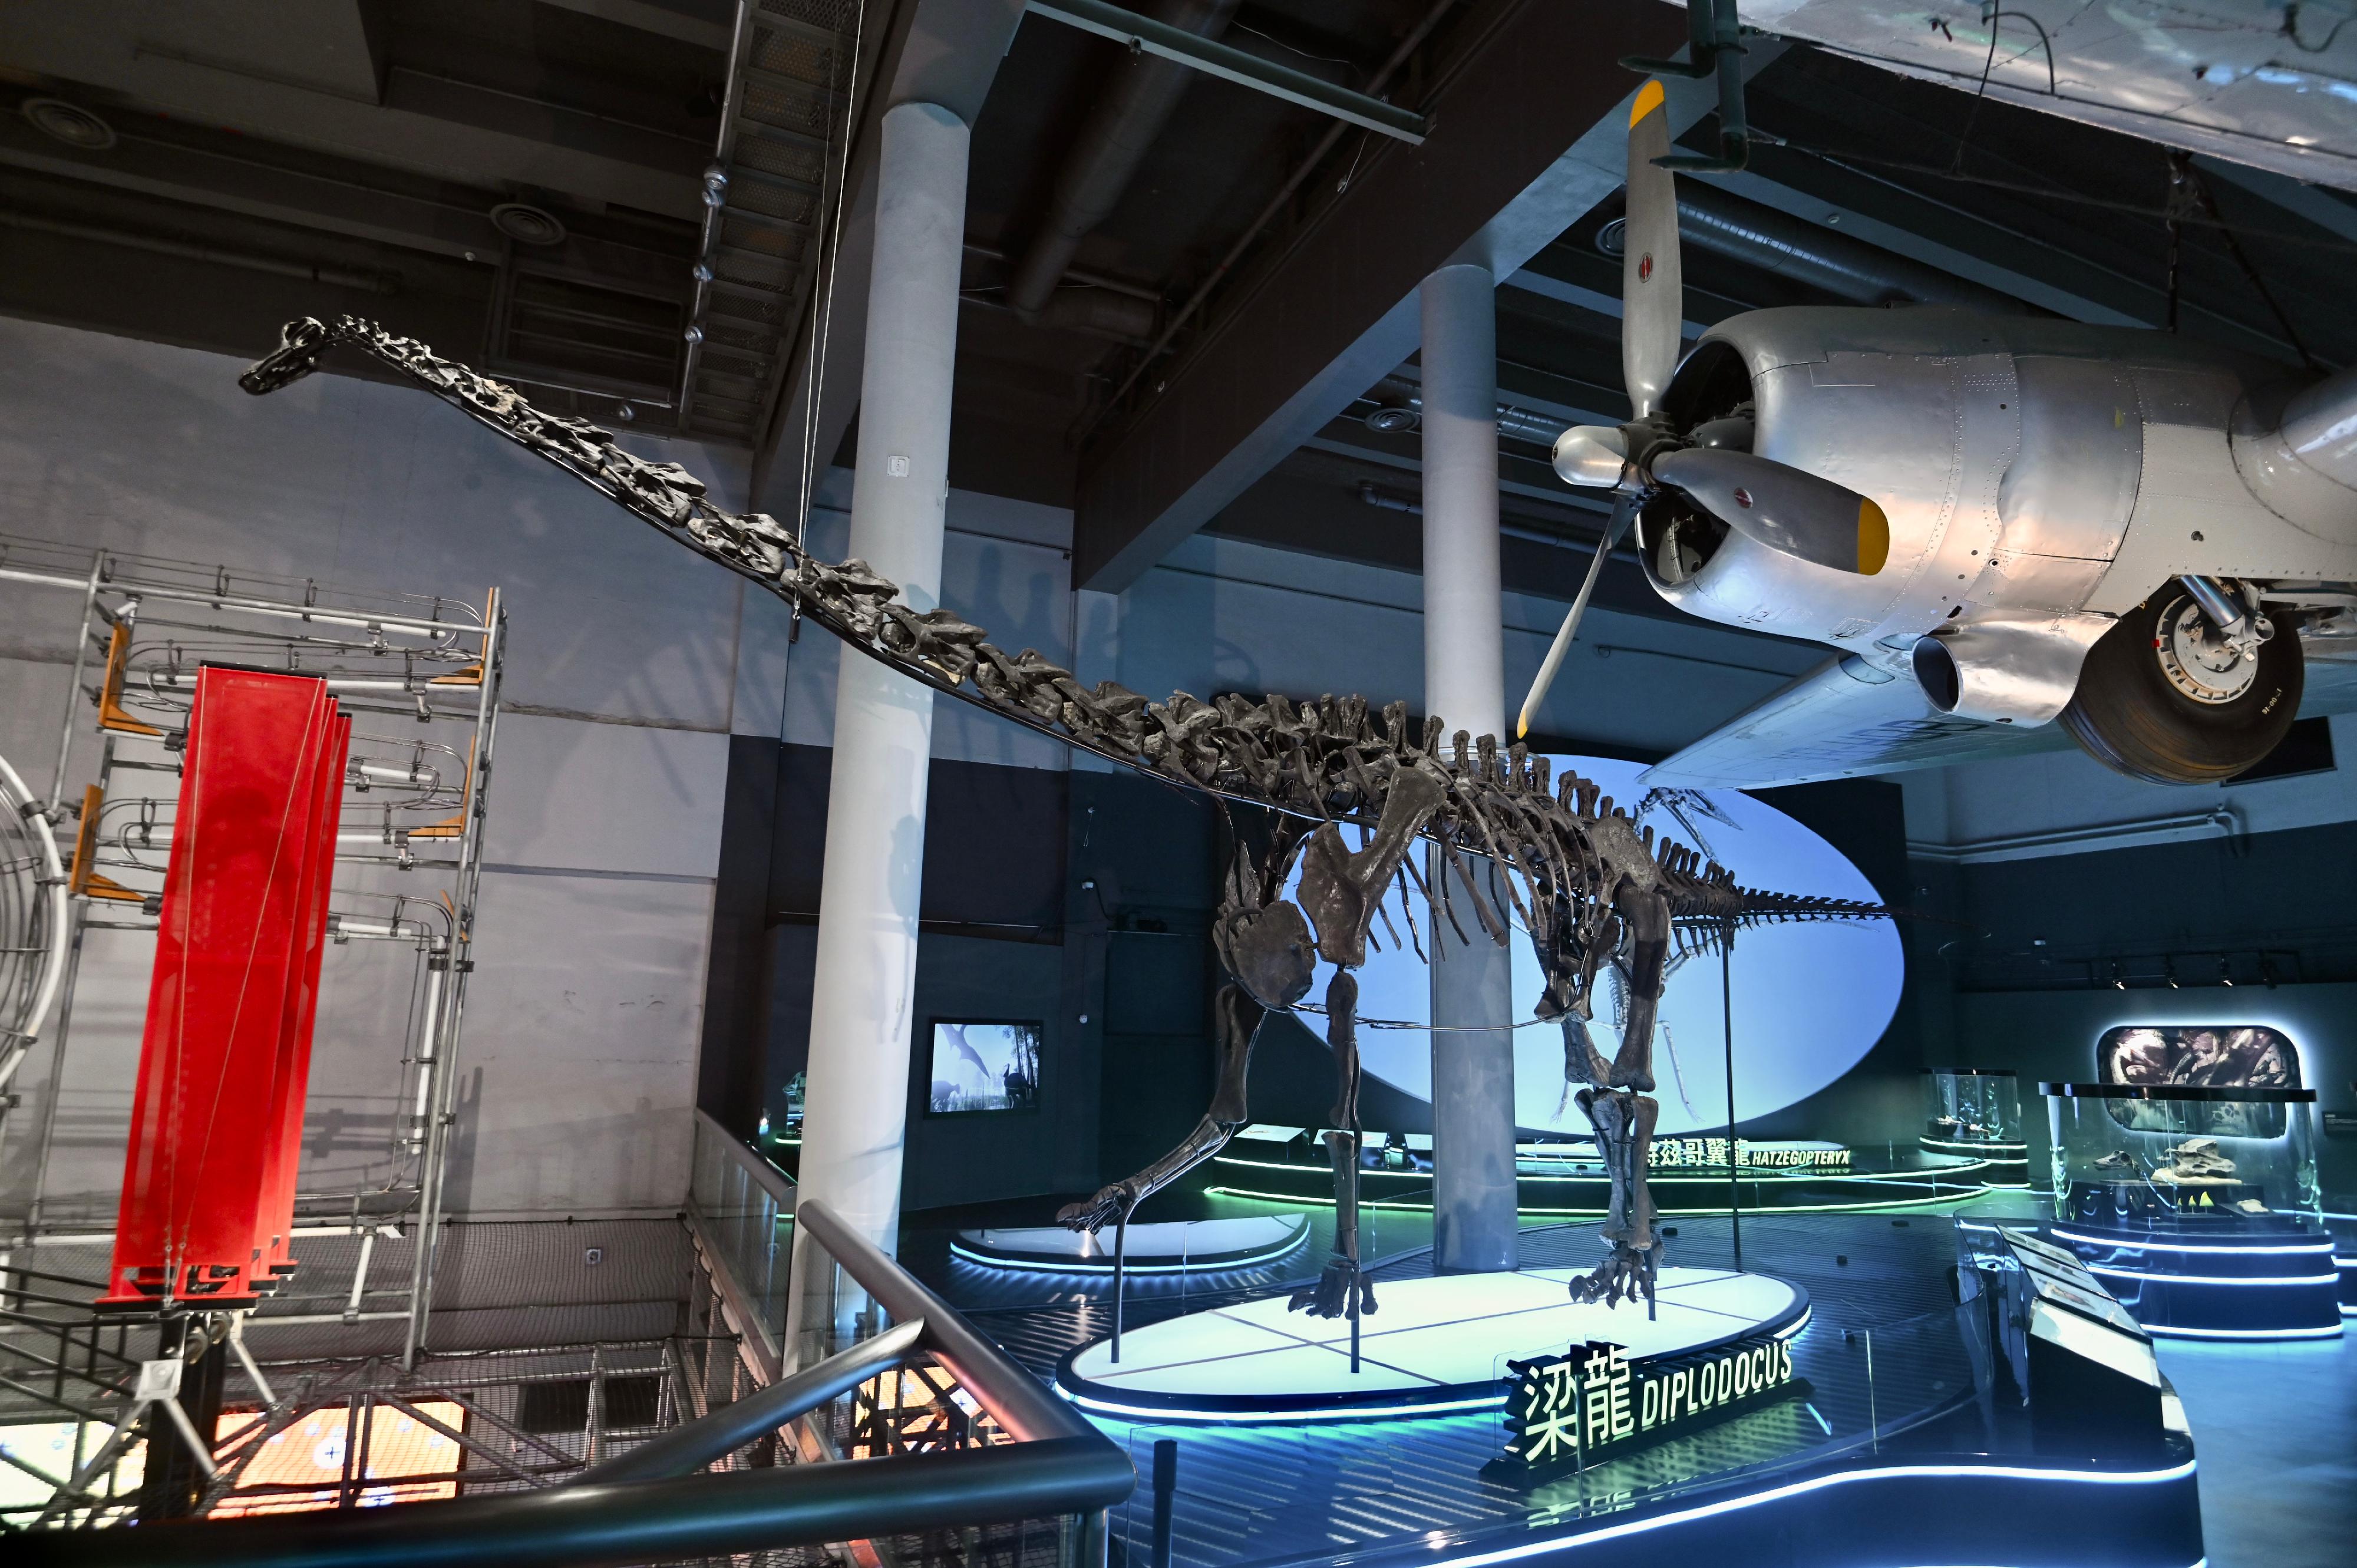 The Hong Kong Science Museum will stage a large-scale dinosaur exhibition, "The Hong Kong Jockey Club Series: The Big Eight - Dinosaur Revelation", from July 8 (Friday). Picture shows the skeleton of Diplodocus, which is exclusively mounted for this exhibition.